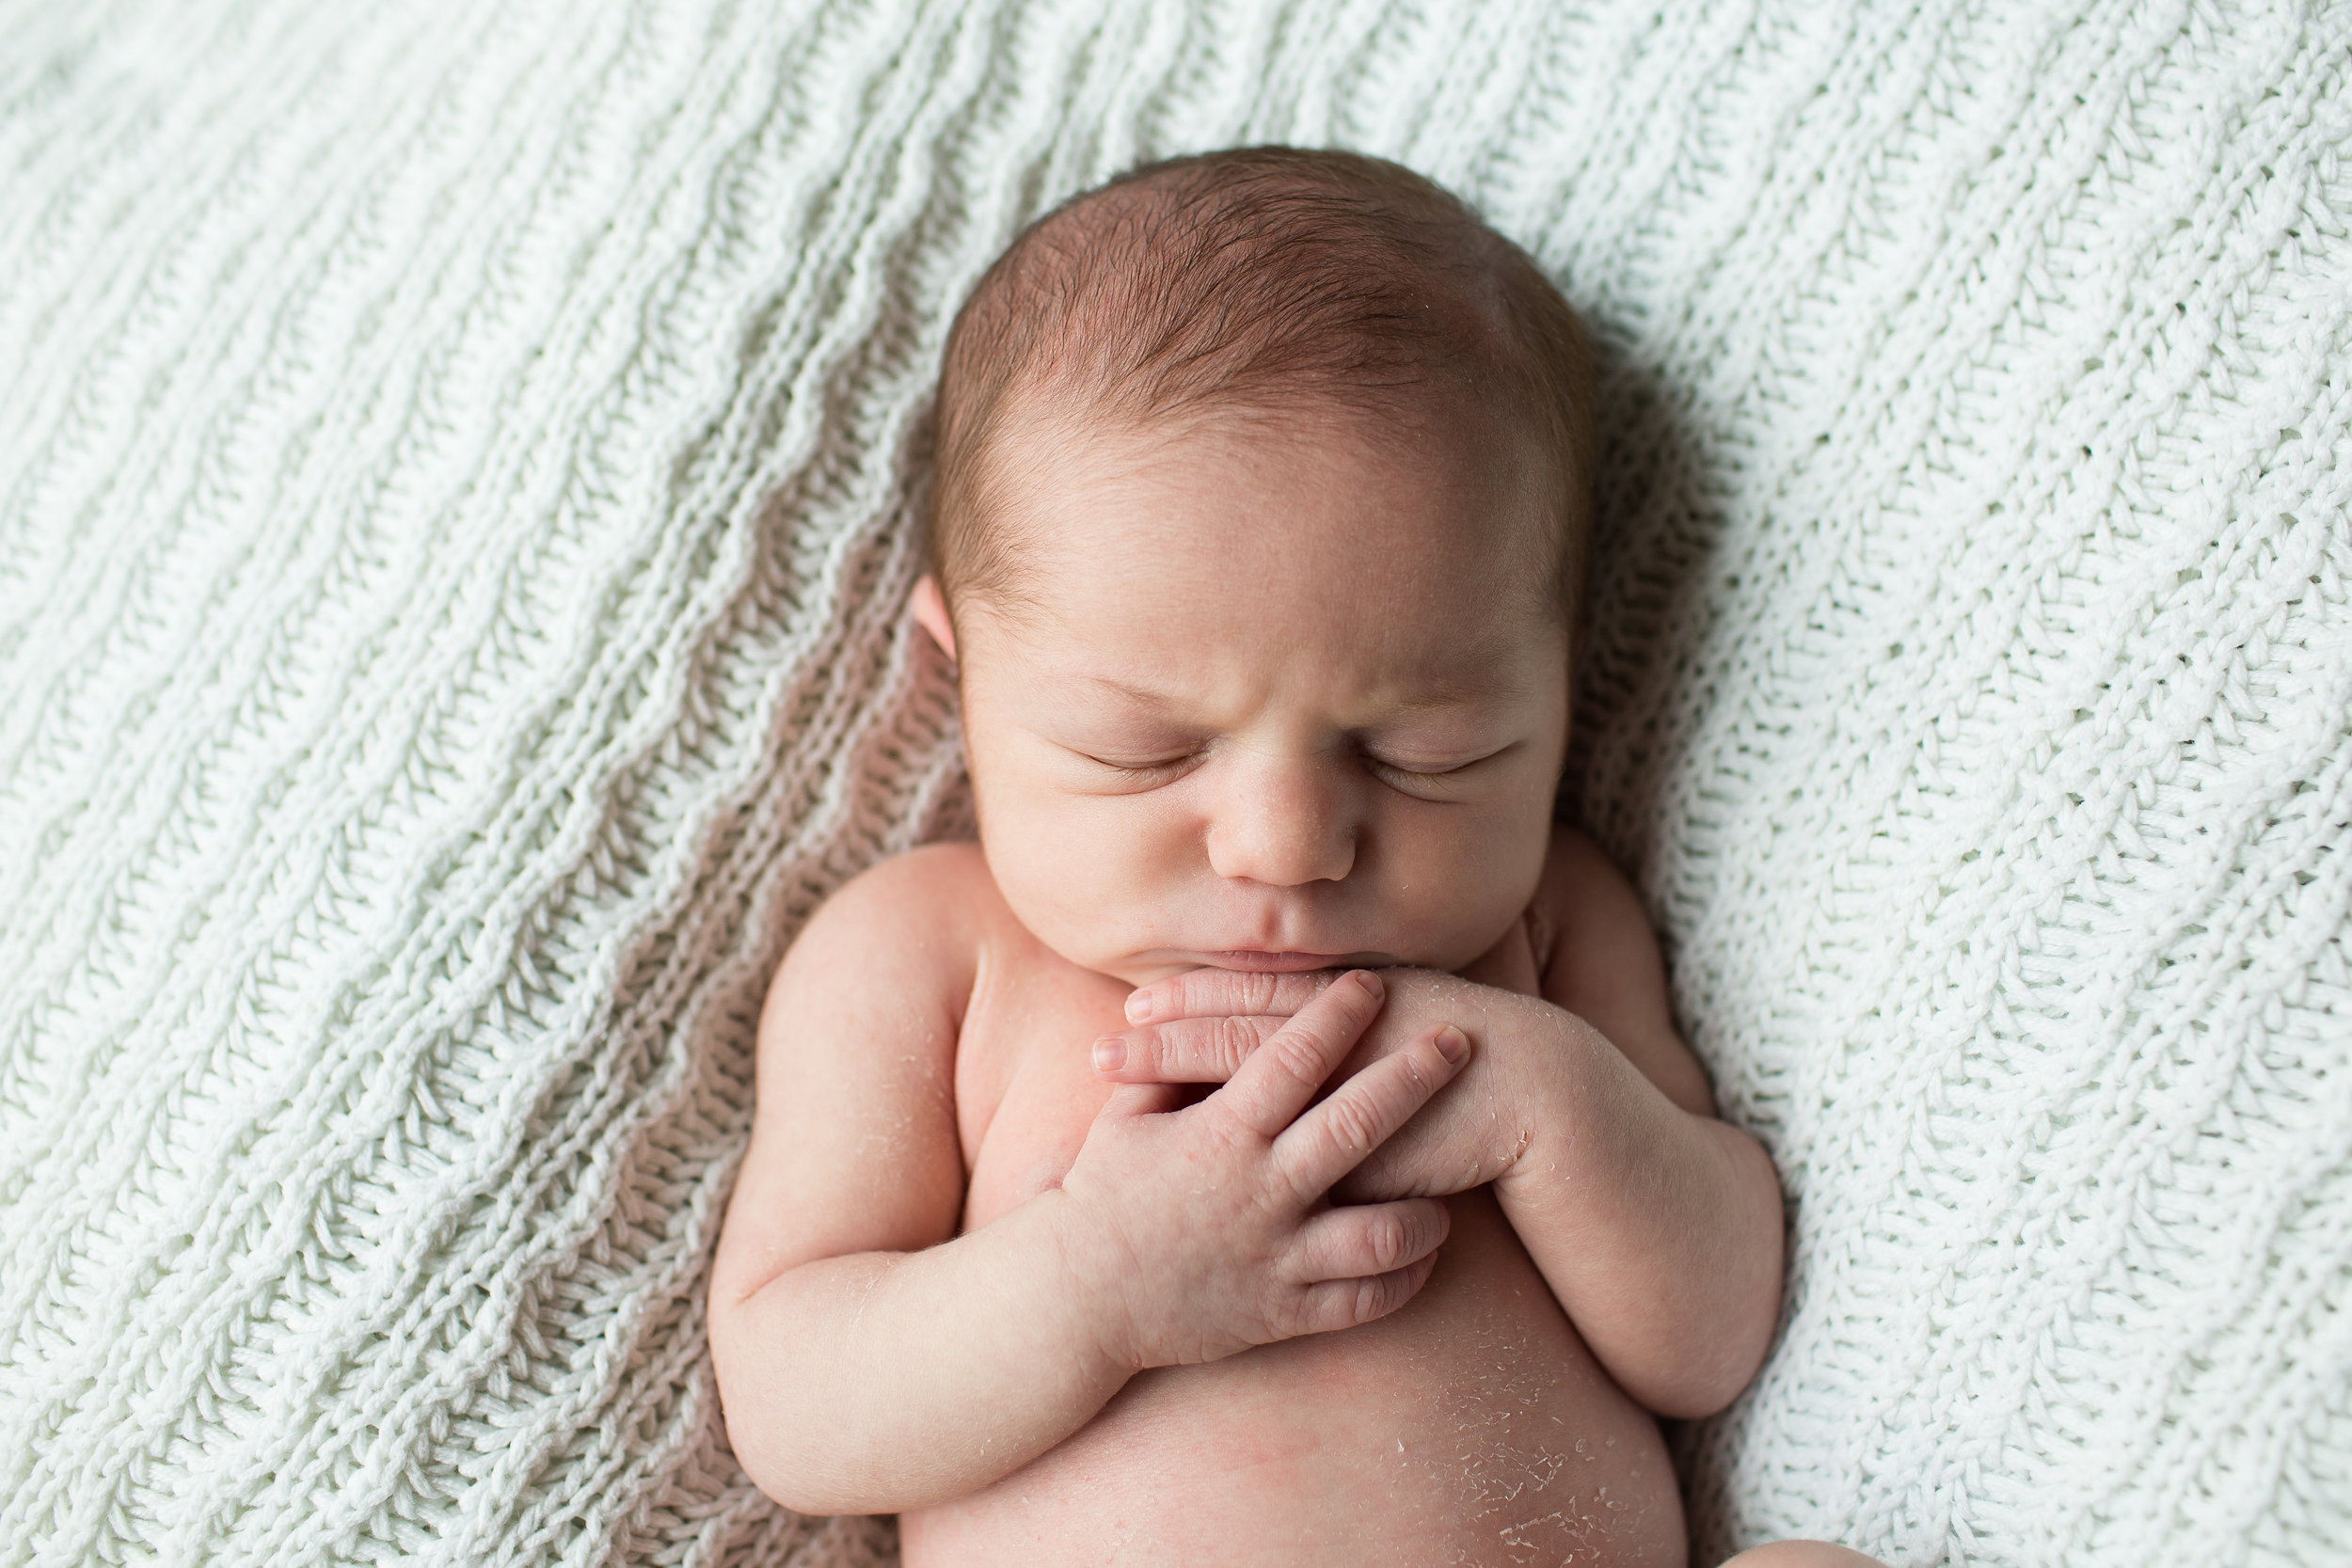 Beauty, Beauty | Ellicott City MD Newborn Photographer | Cat and the Fiddle Photography